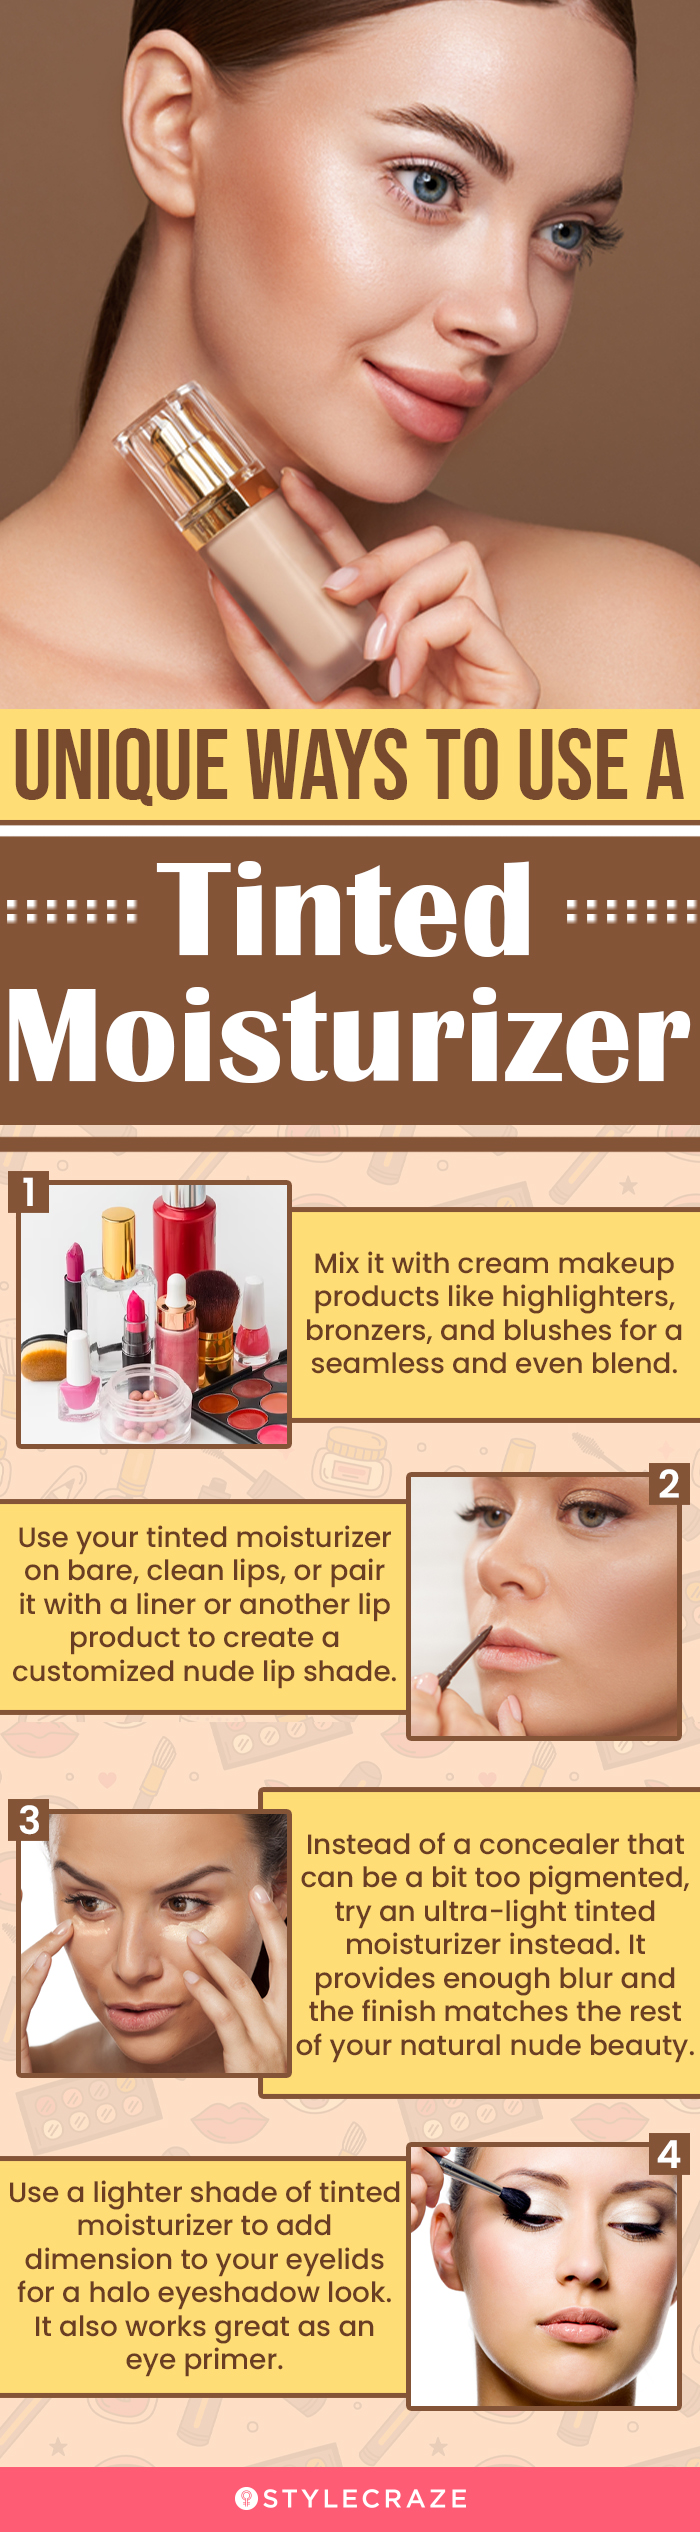 Unique Ways To Use A Tinted Moisturizer (infographic)